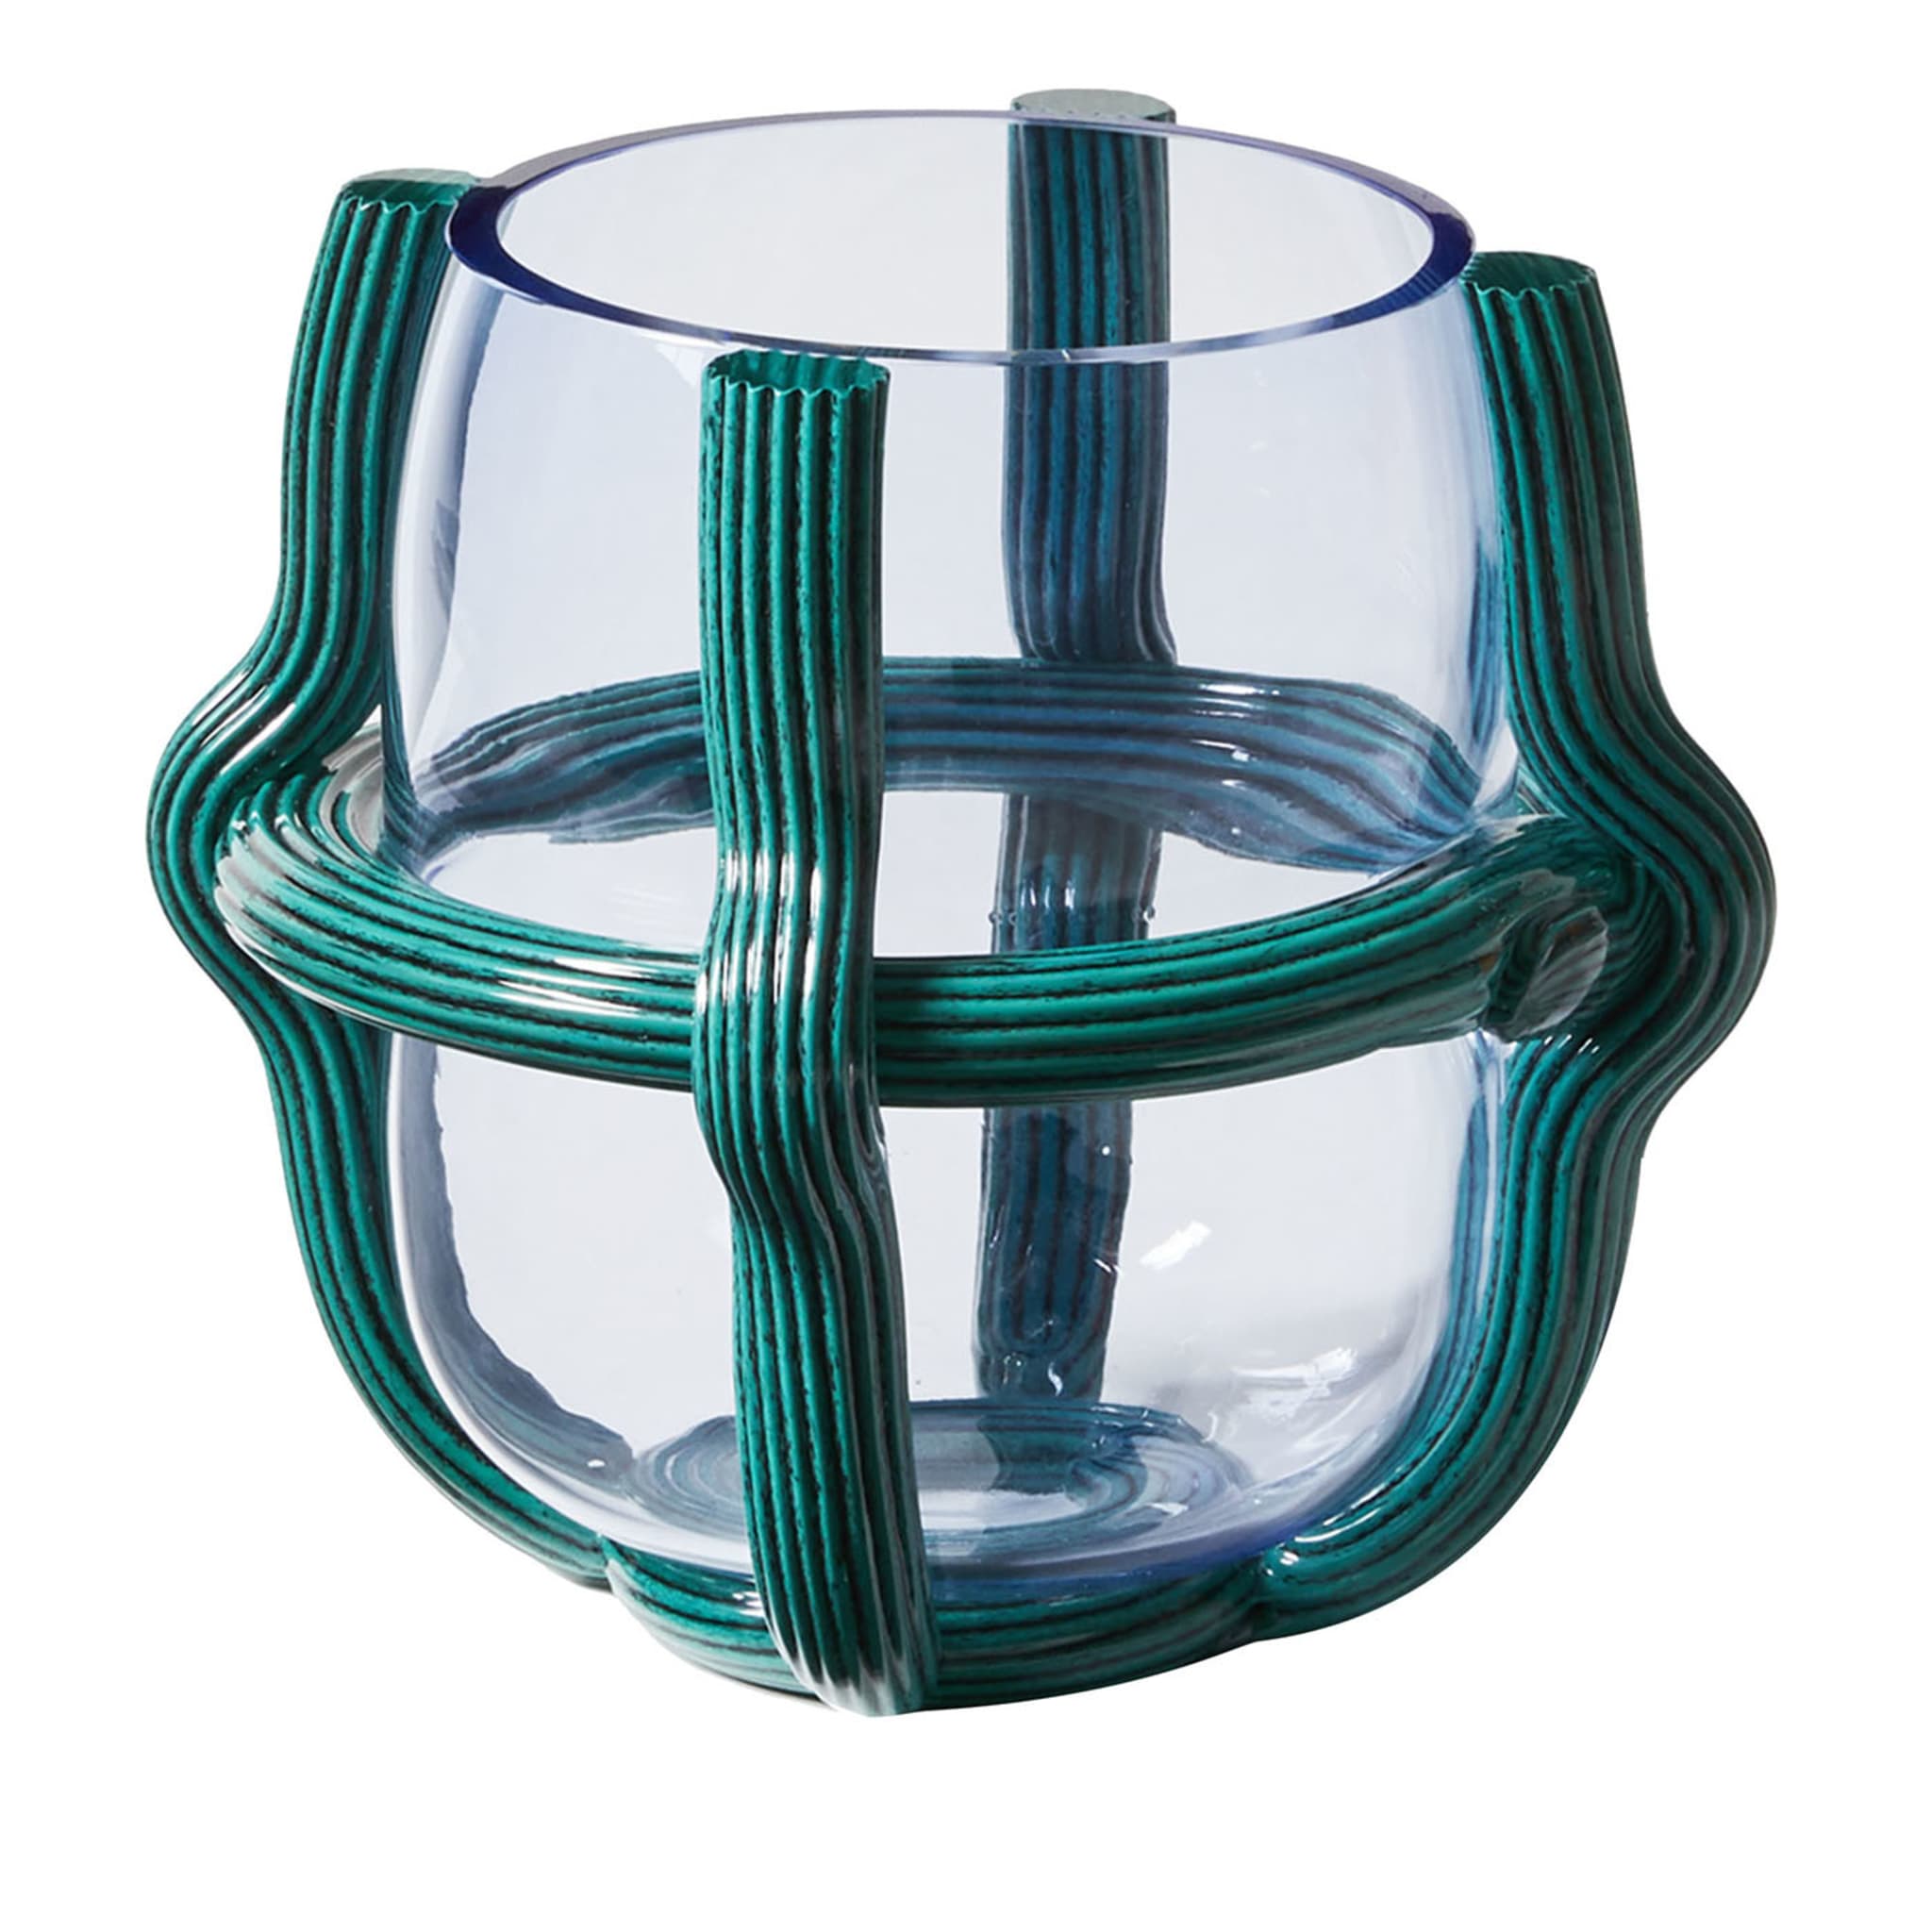 Sestiere Small Teal & Transparent Vase by Patricia Urquiola - Main view